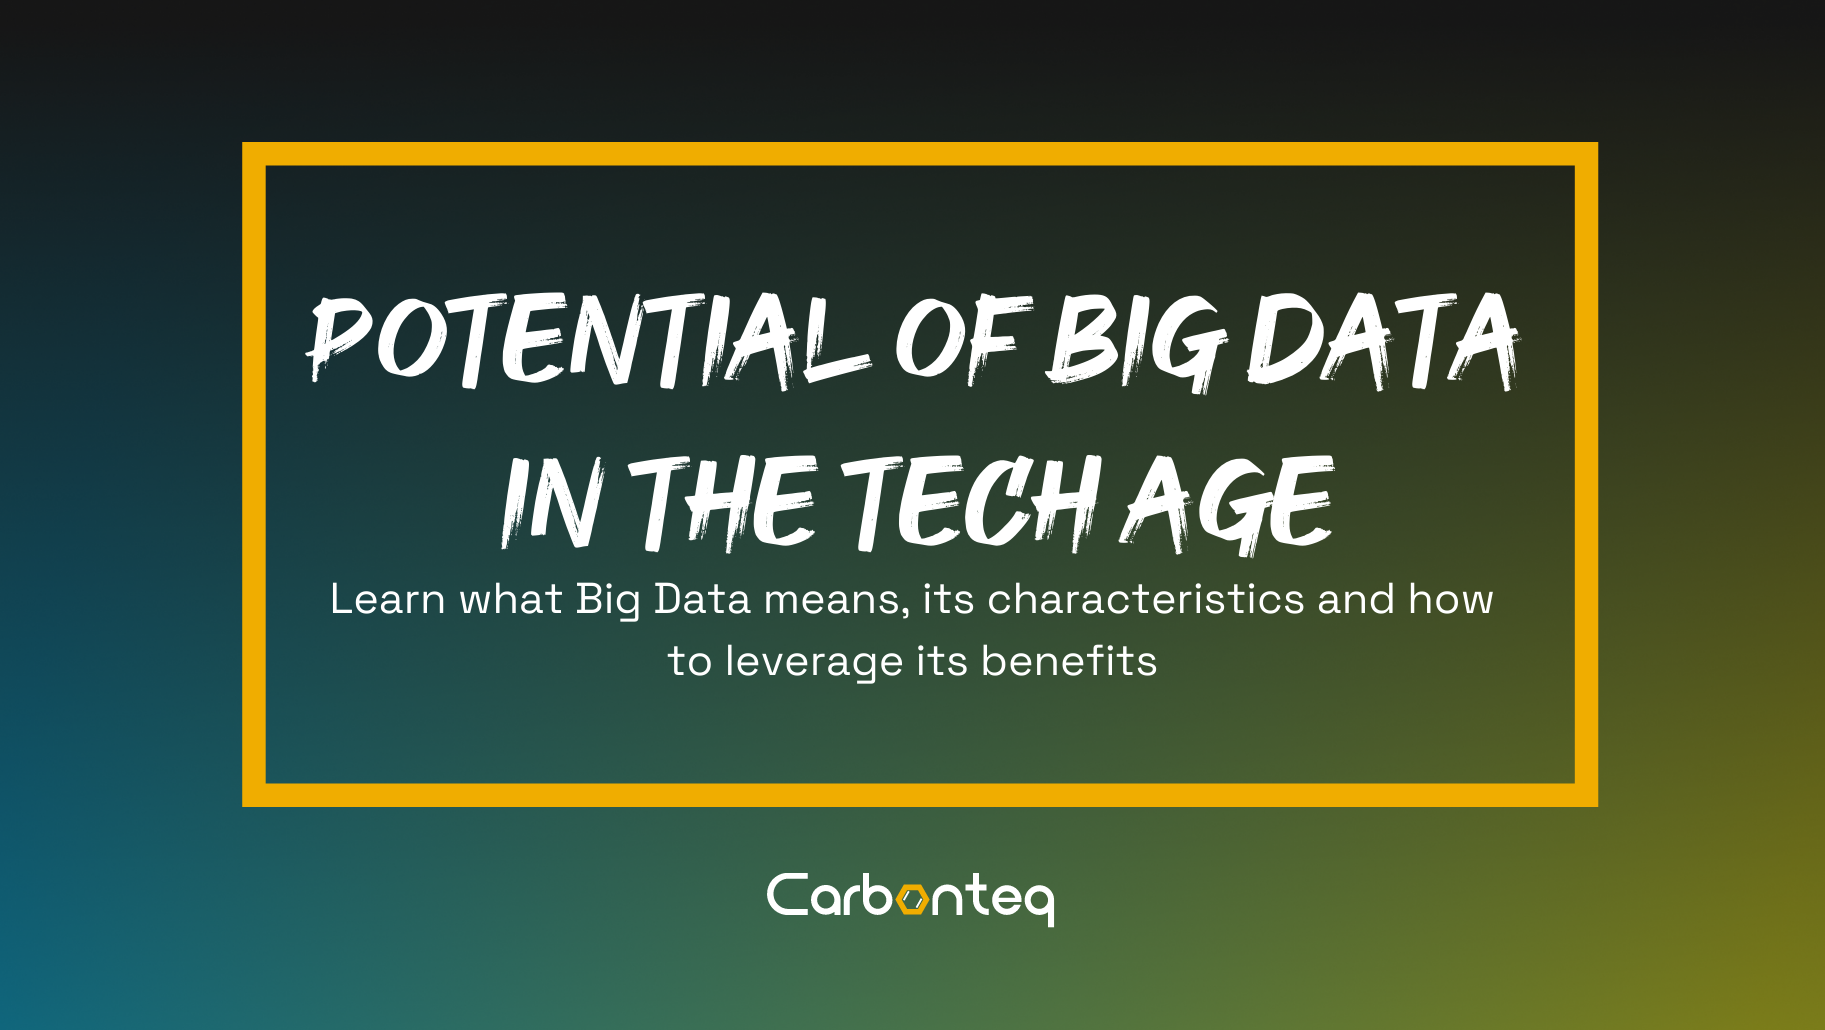 The Potential of Big Data in Technological Age